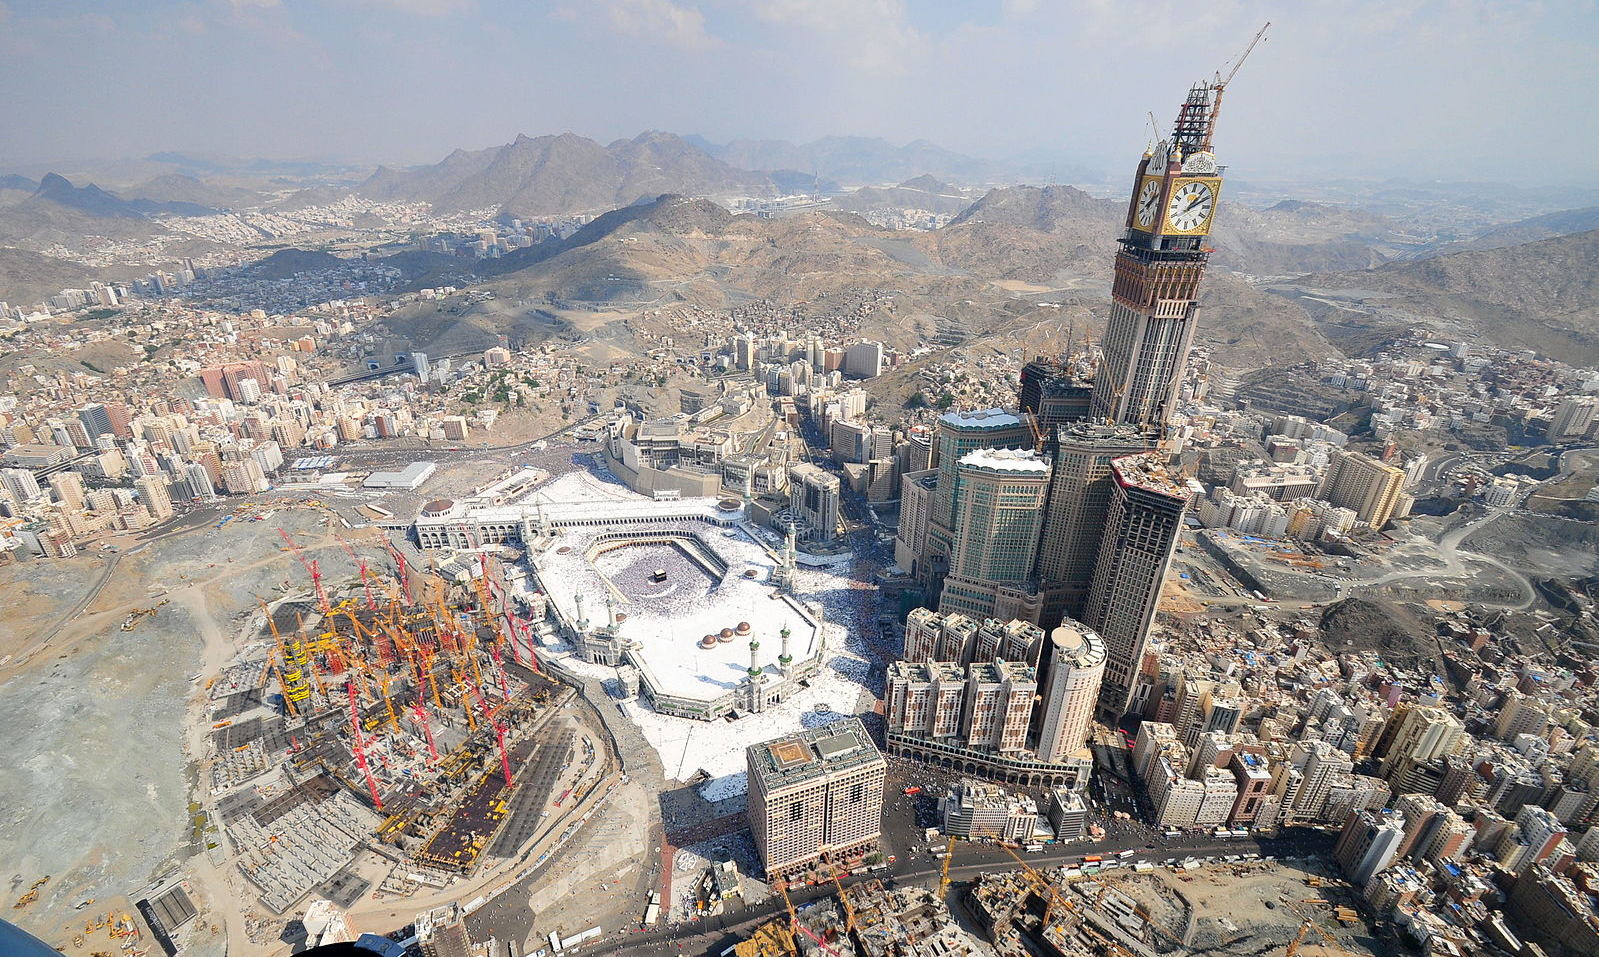 Construction surrounding the Grand Mosque in Mecca.